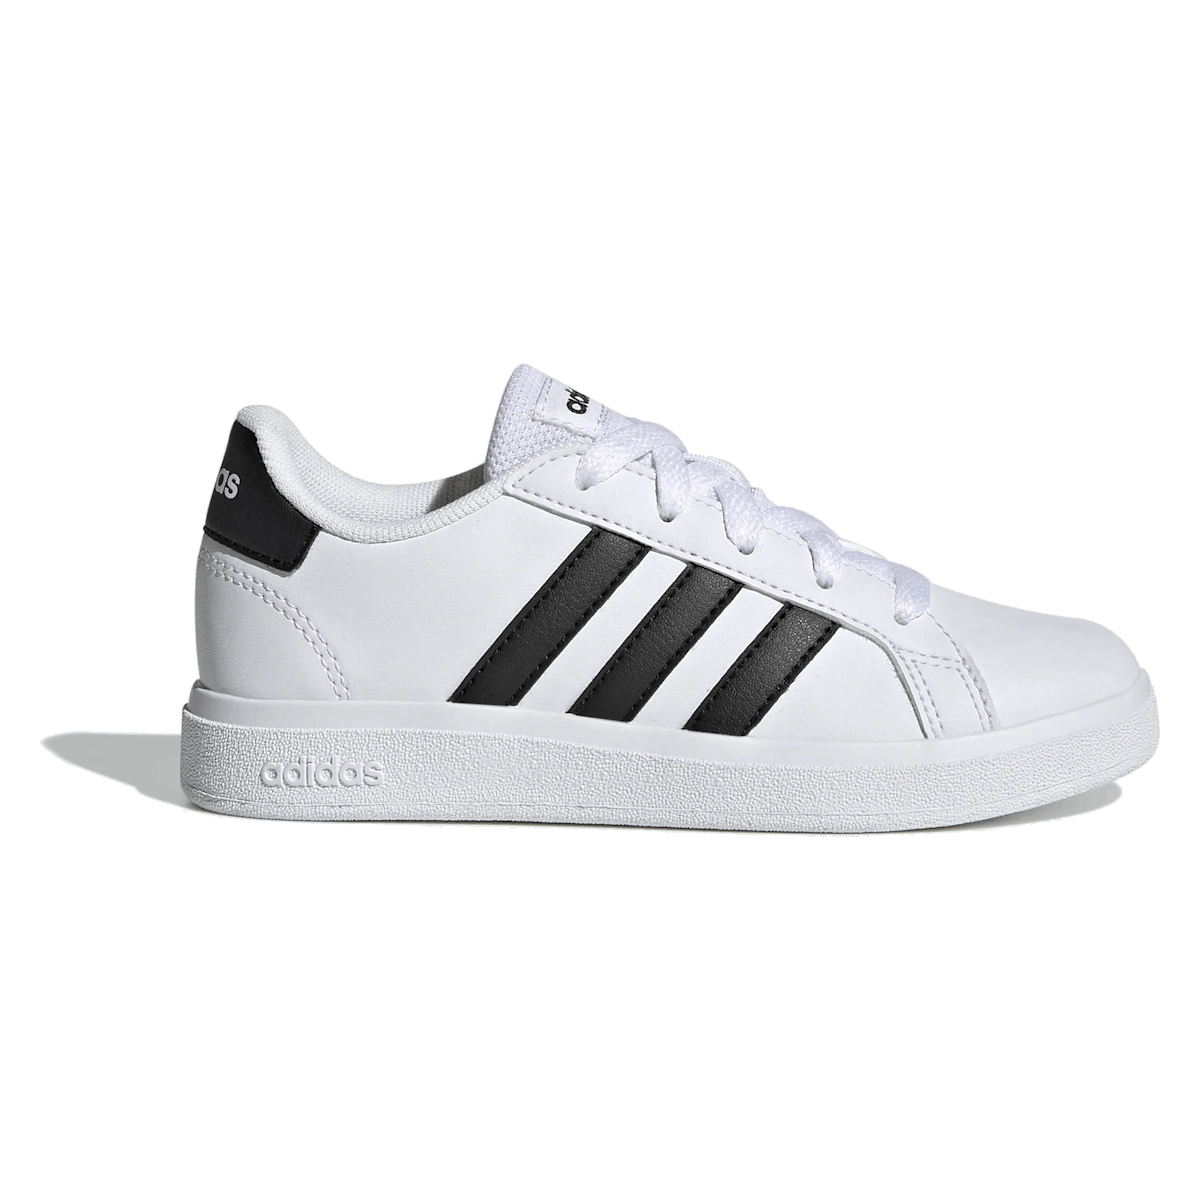 adidas Grand Court Lifestyle Tennis Lace-Up